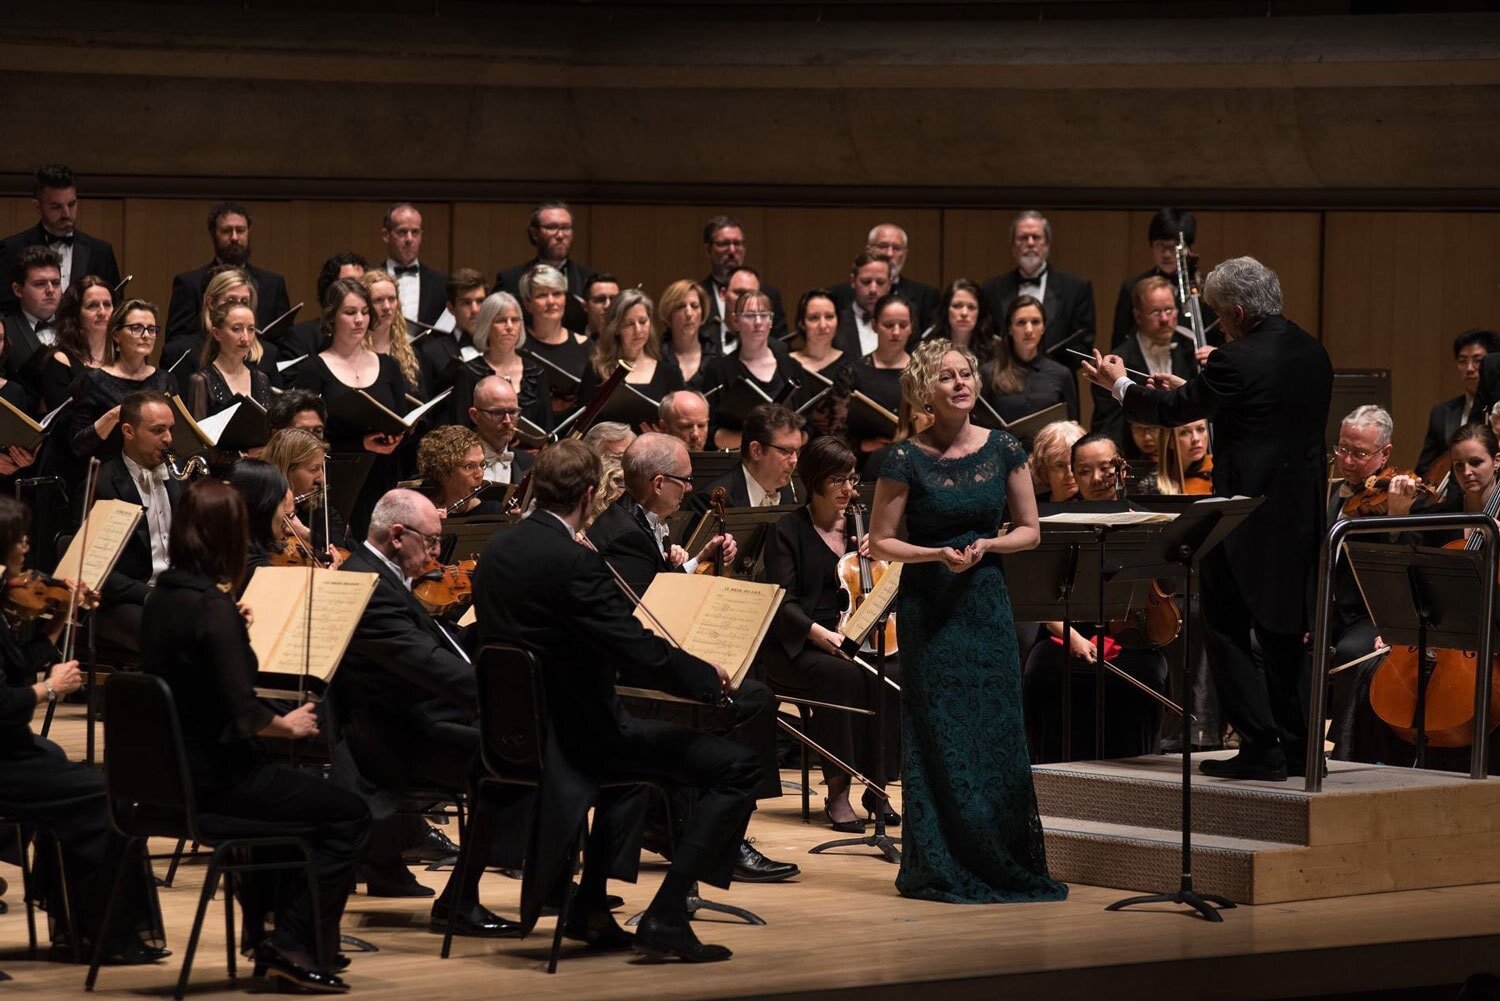  “Charging out of the gate with a bang instead of a whimper, the Canadian ensemble, along with Carla Huhtanen and the Wiener Singakademie,&nbsp;opened with Boulez’s&nbsp; Le Soleil des eaux . Hutanen’s soprano spoke clearly throughout her range and l